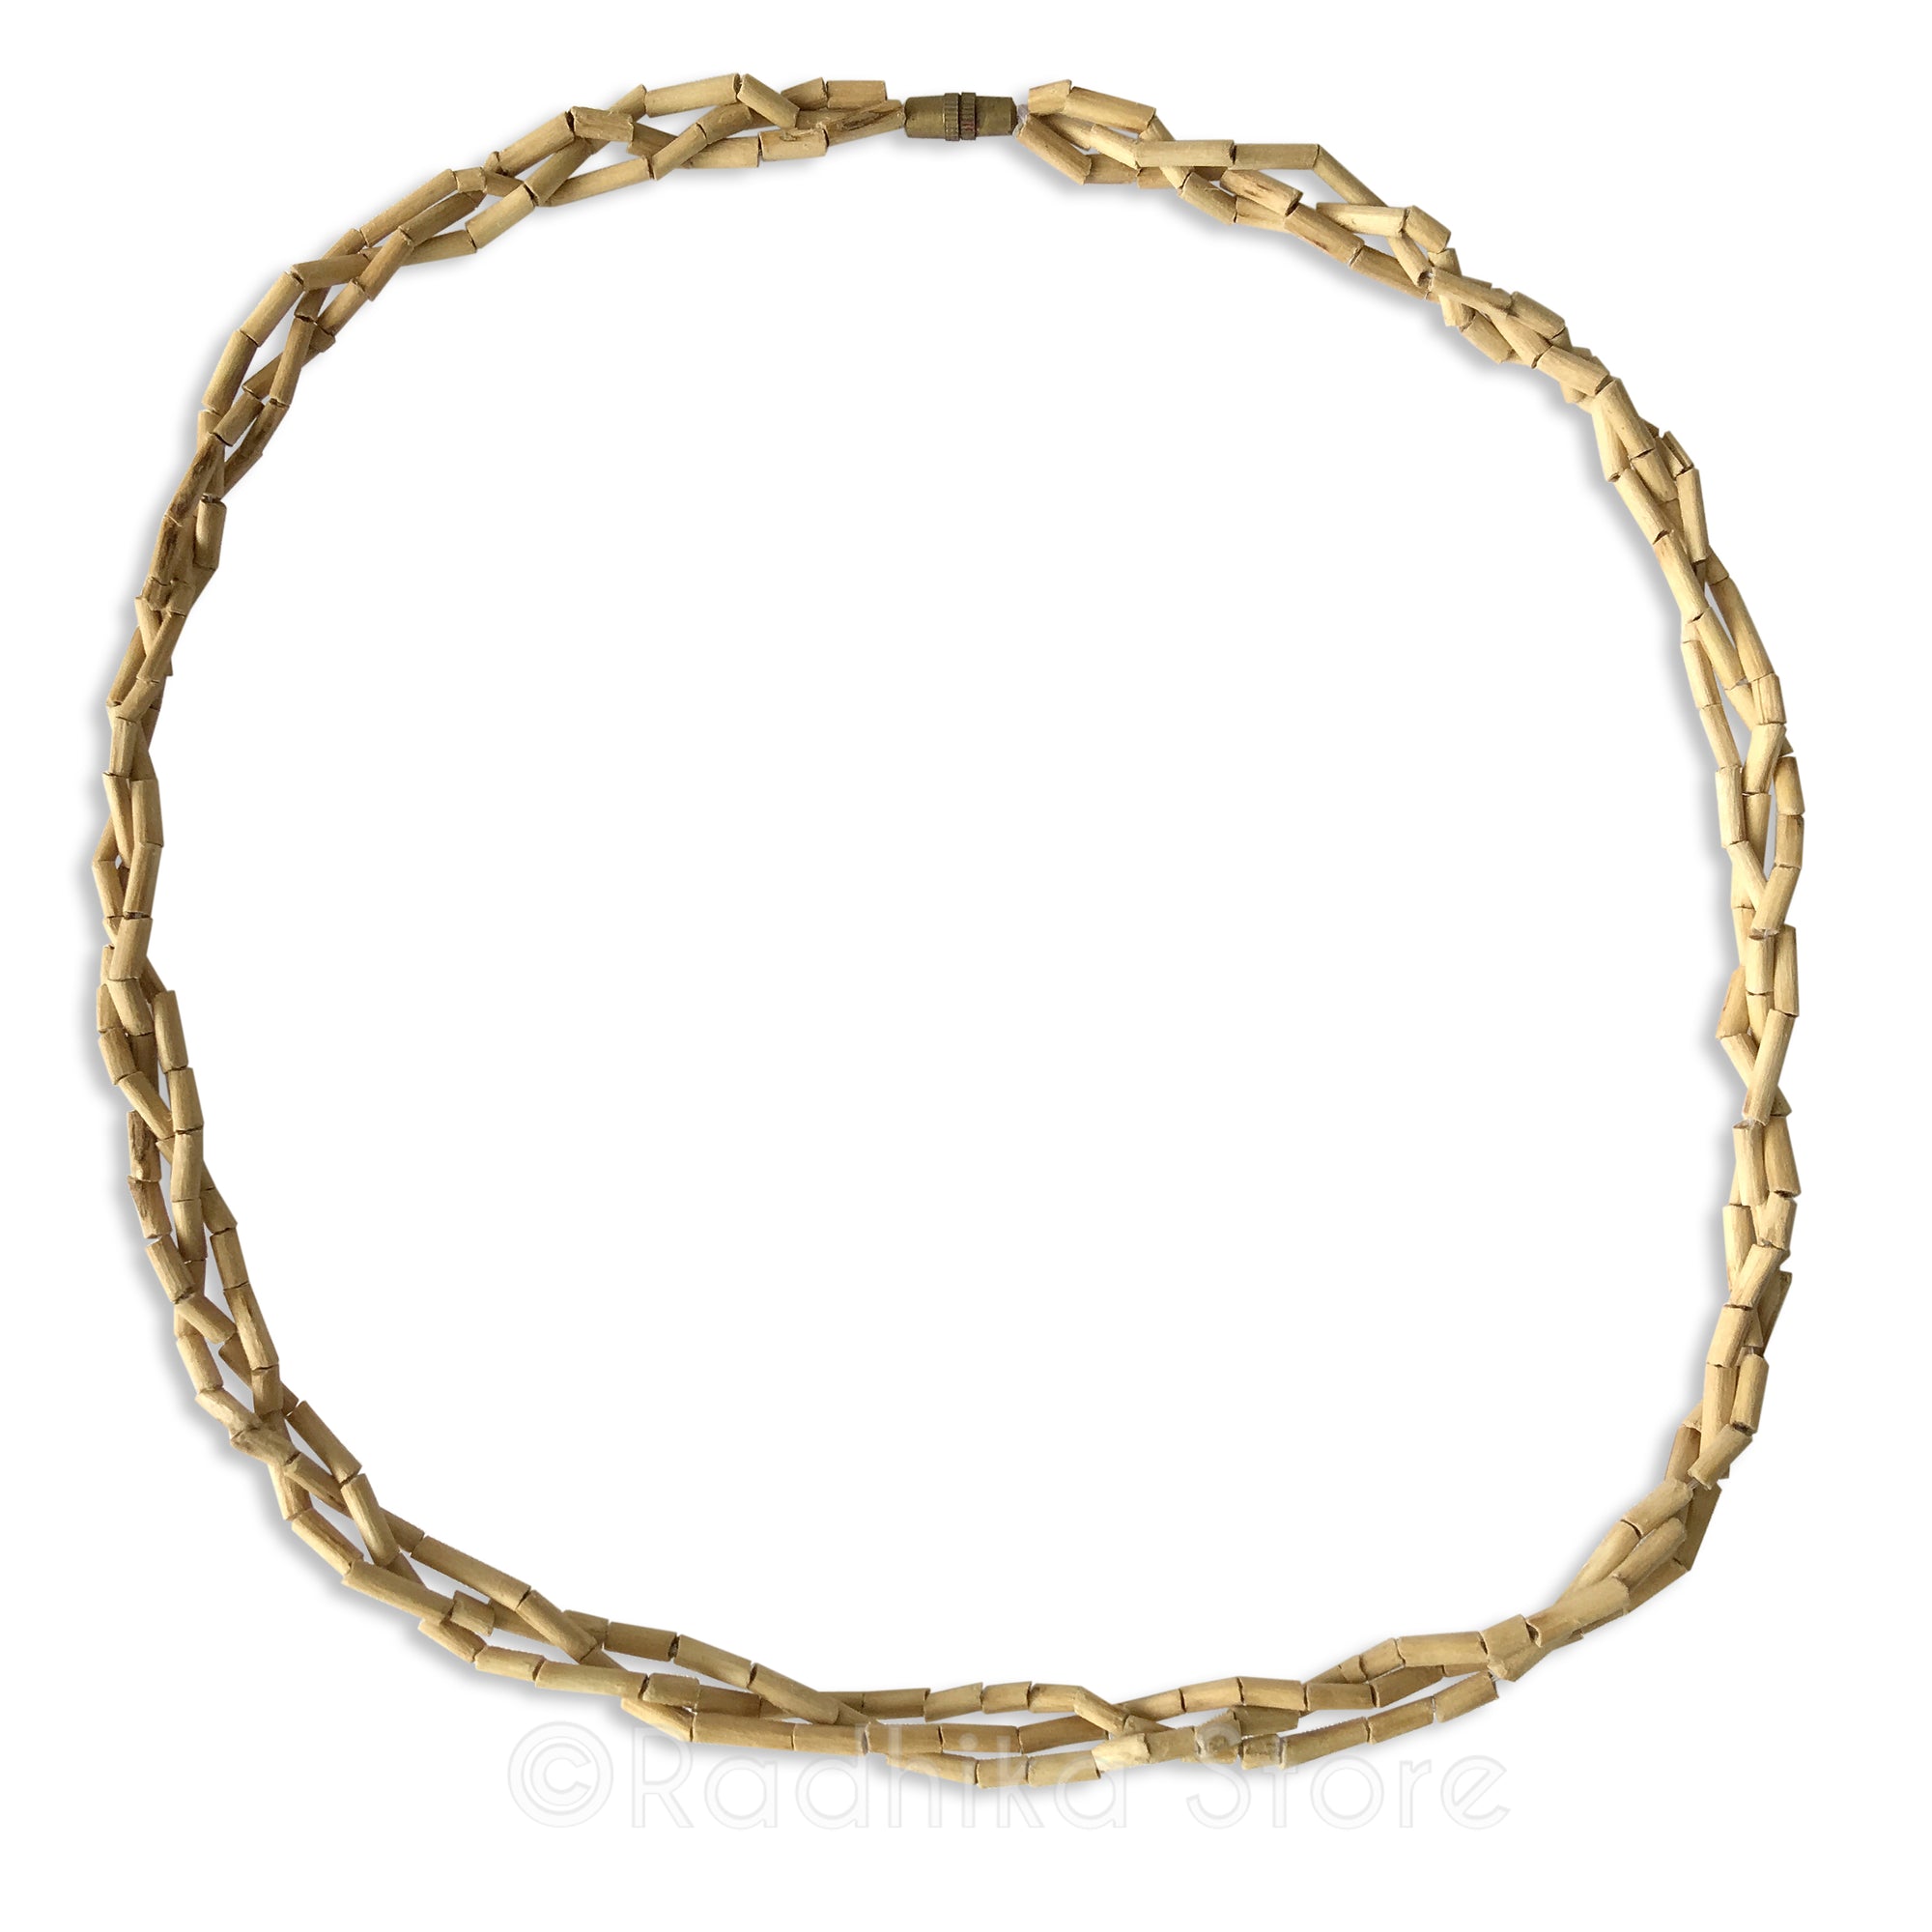 Thin, Long Bead - Braided Tulsi Necklace - 1 Round